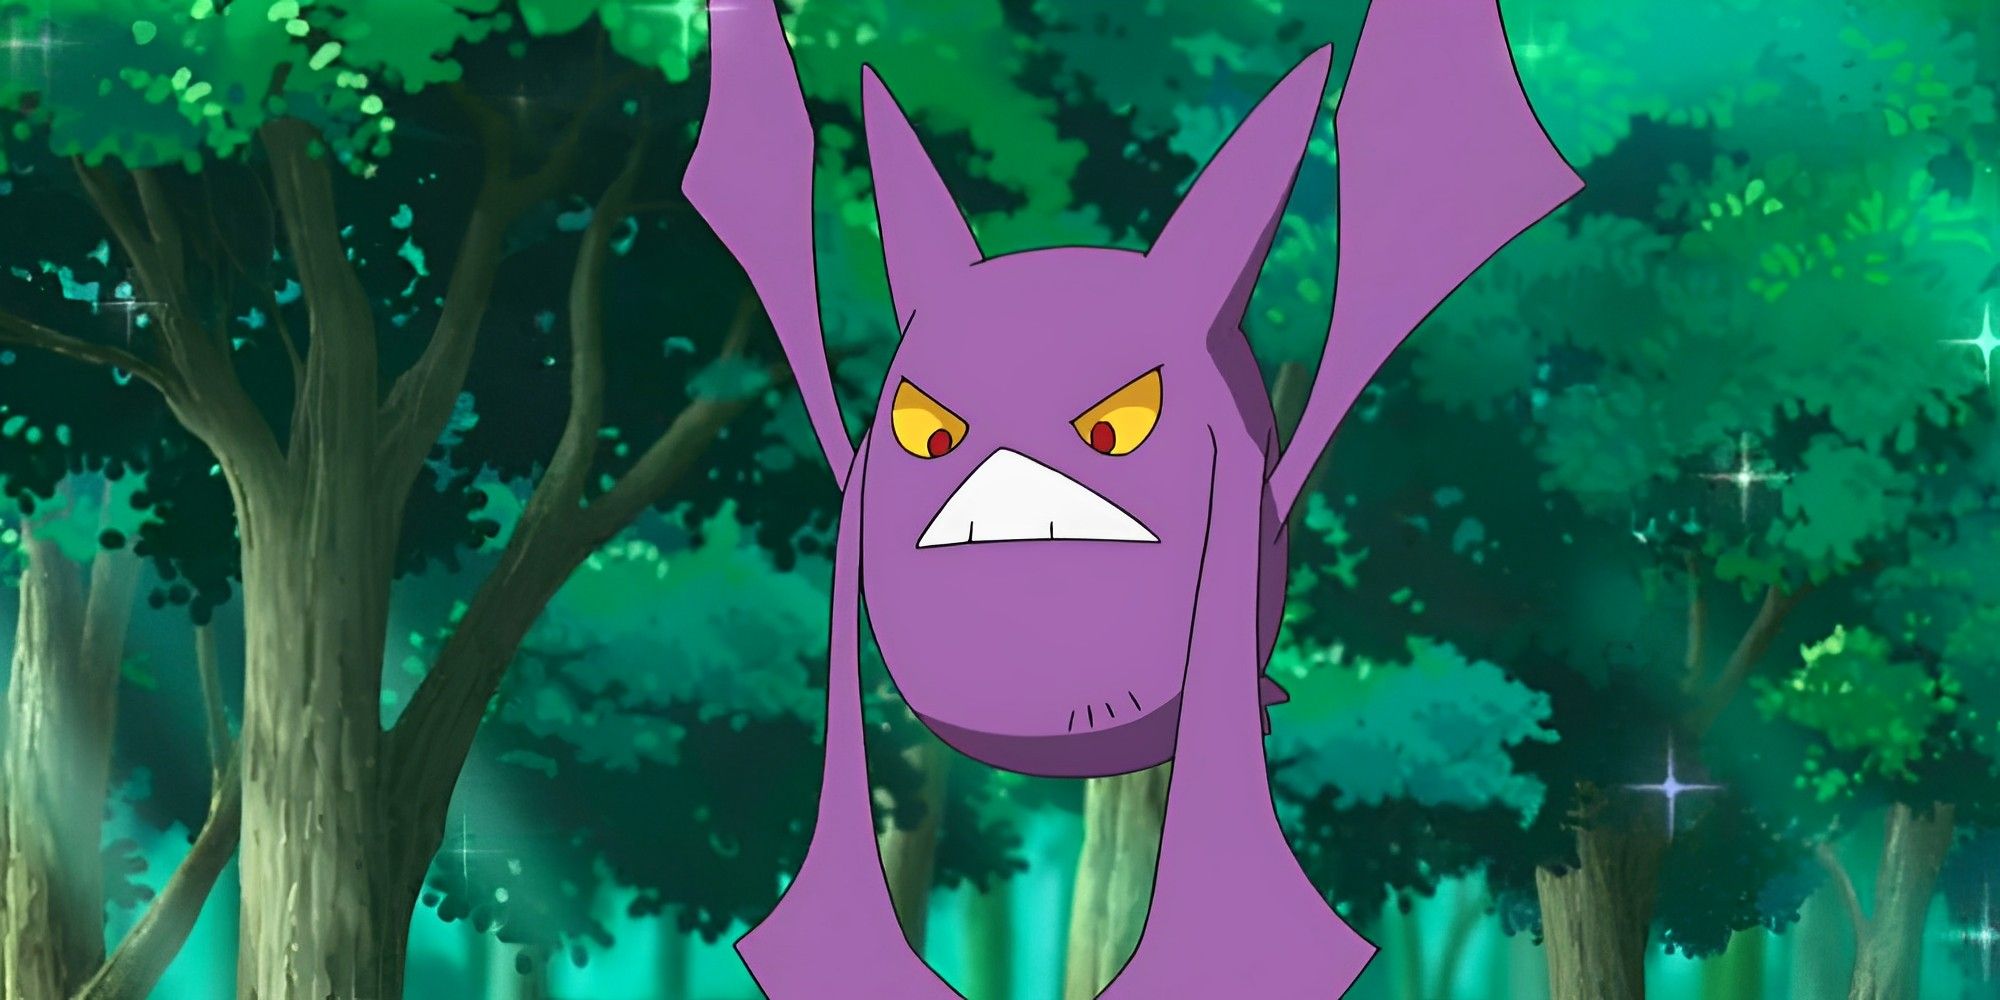 Crobat flying in a forest